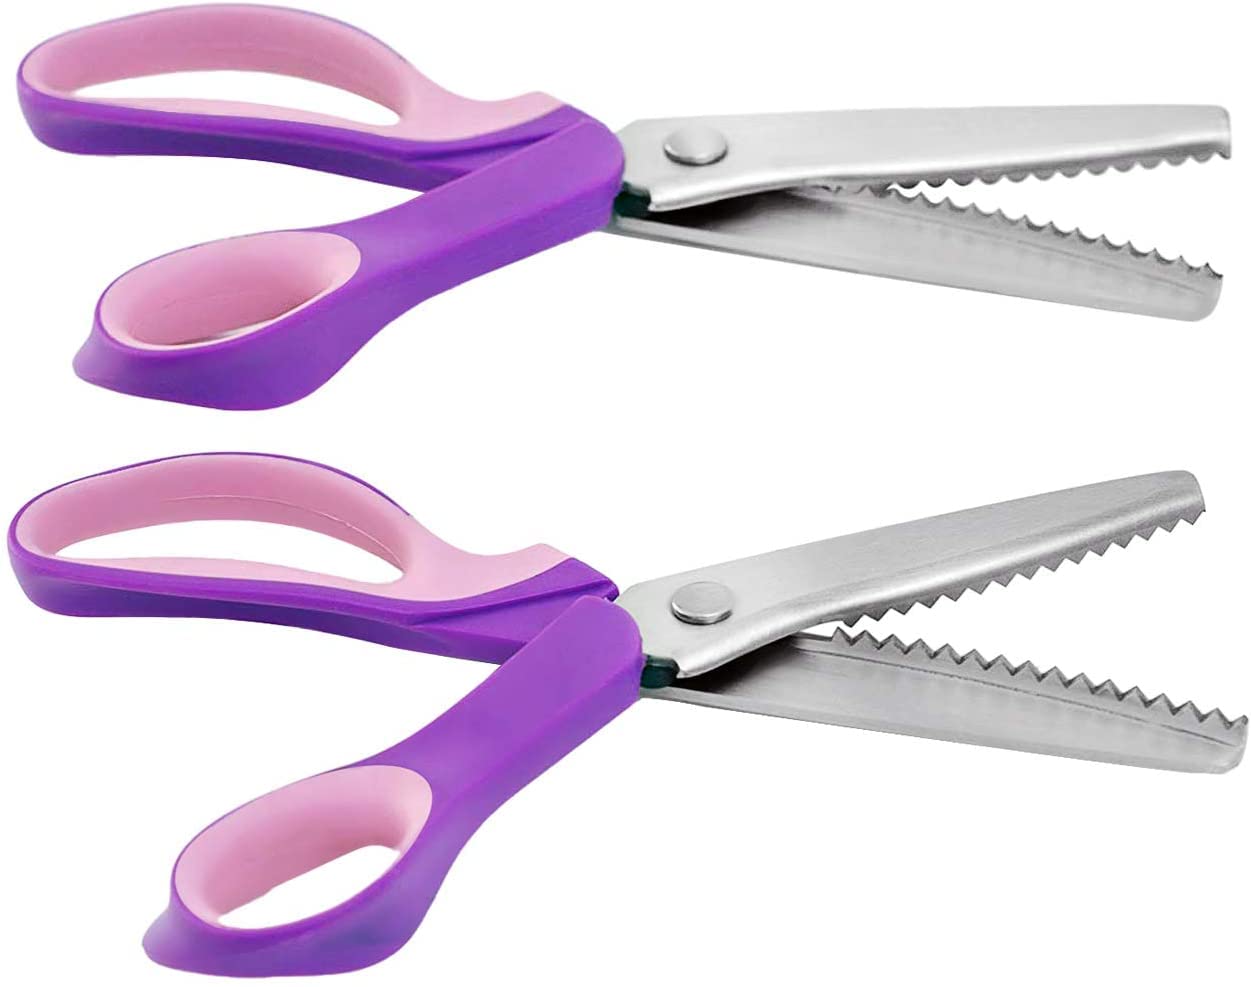 Pink Scissors for Fabric Cutting, Zigzag Scissors, Adult Scrapbooking Scissors with Decorative Edge, Great for Many Kinds of Sewing Fabrics, Leather